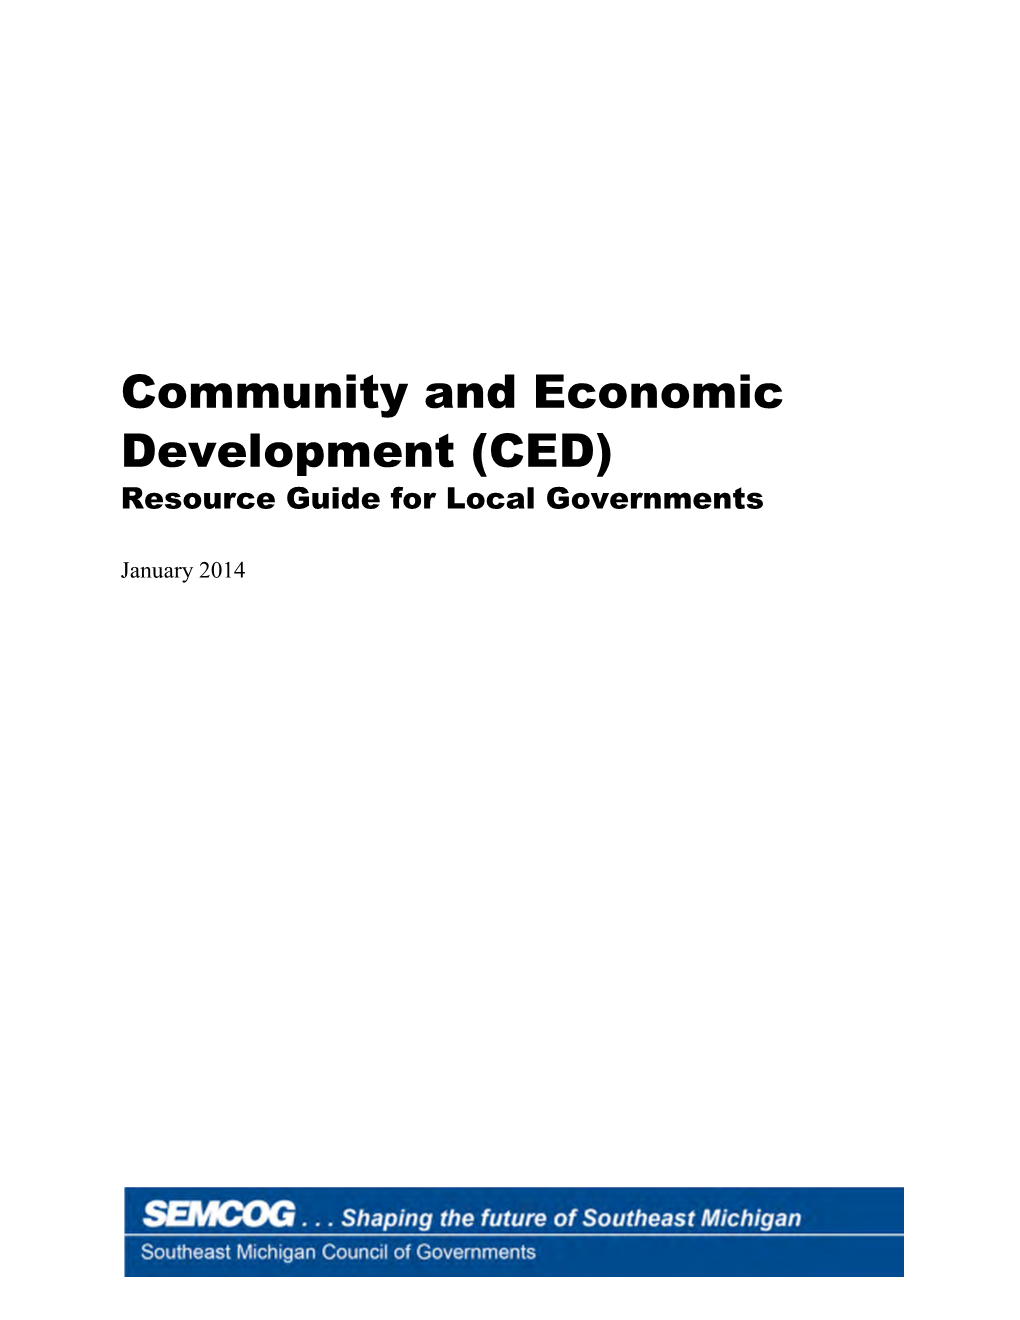 Community and Economic Development (CED) Resource Guide for Local Governments